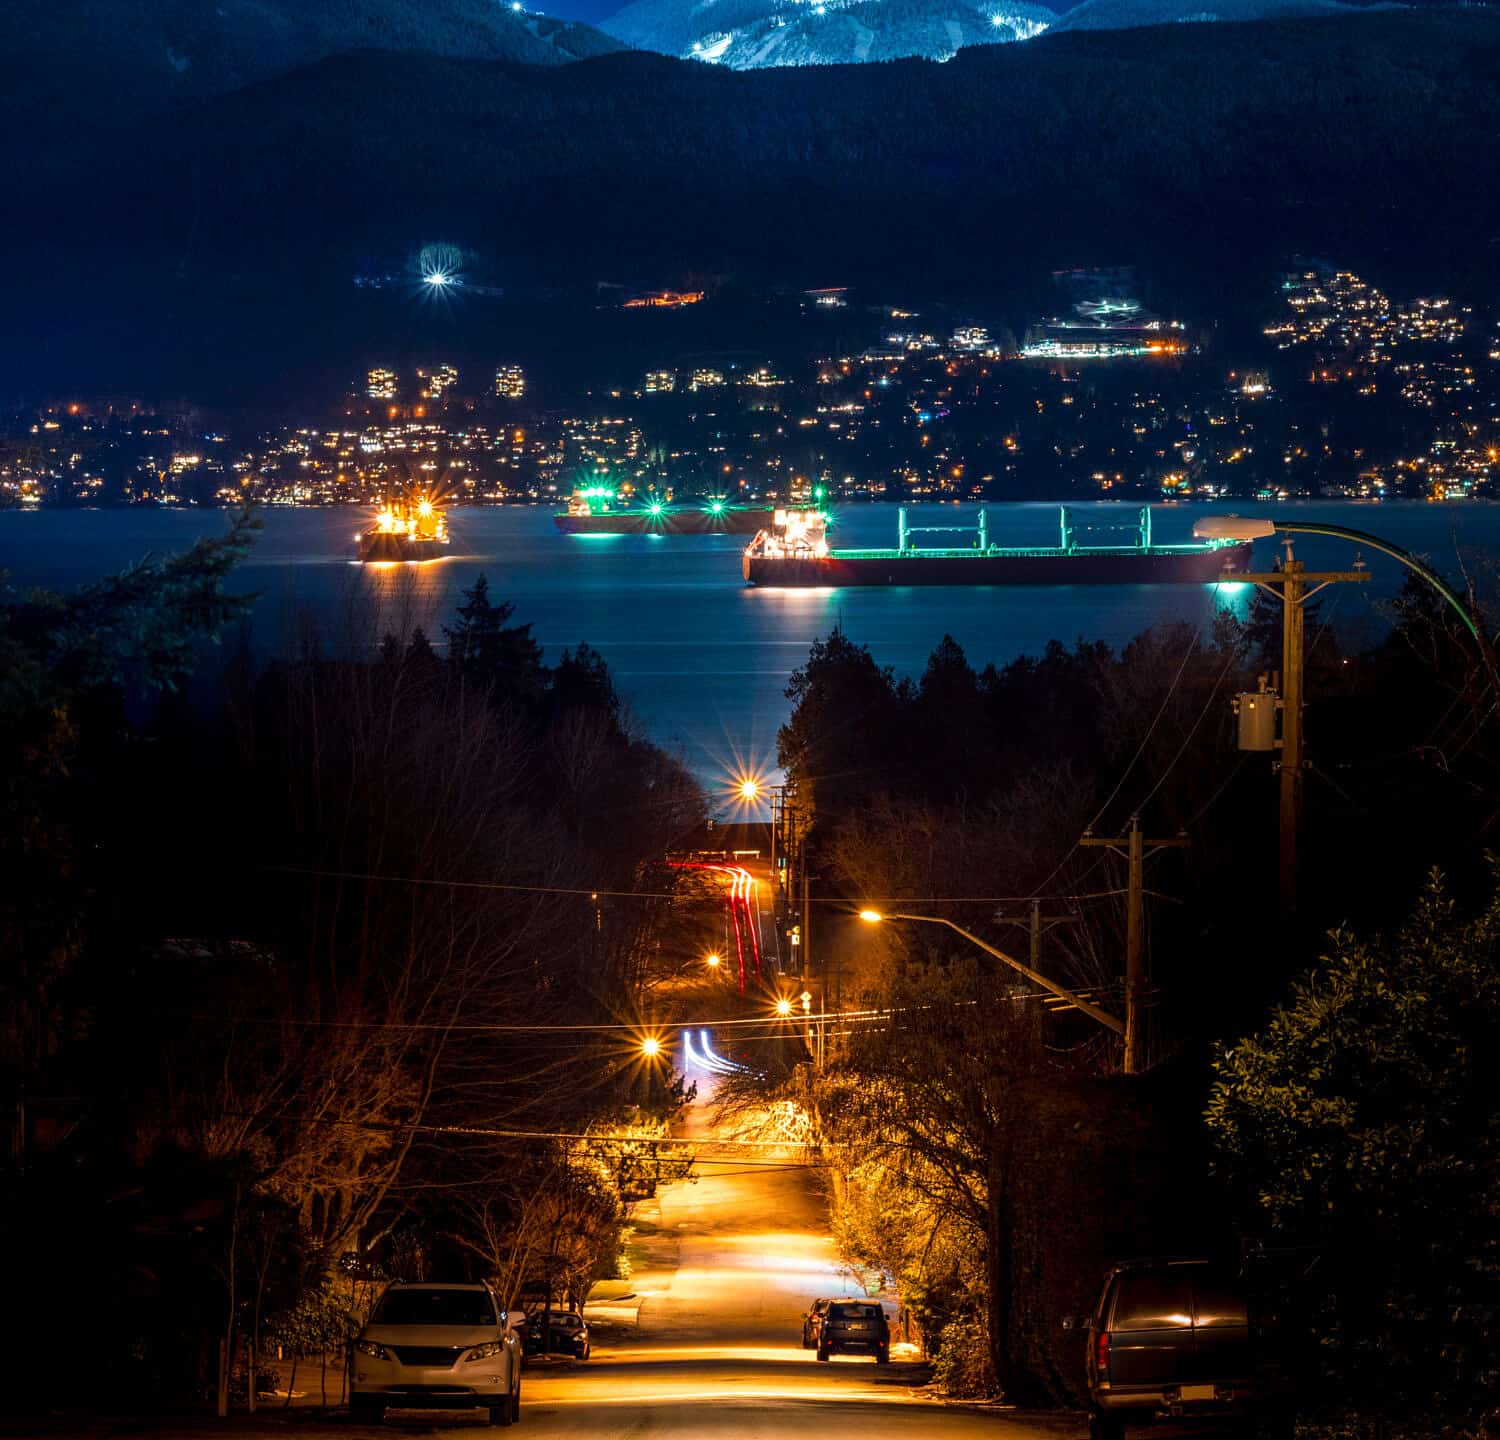 VANCOUVER MOUNTAIN SCAPE AT NIGHT - Beautiful scene of urban city street light, looking downhill on ships in harbour. Stunning view in distance. Grouse Mountain in Vancouver, British Columbia, Canada